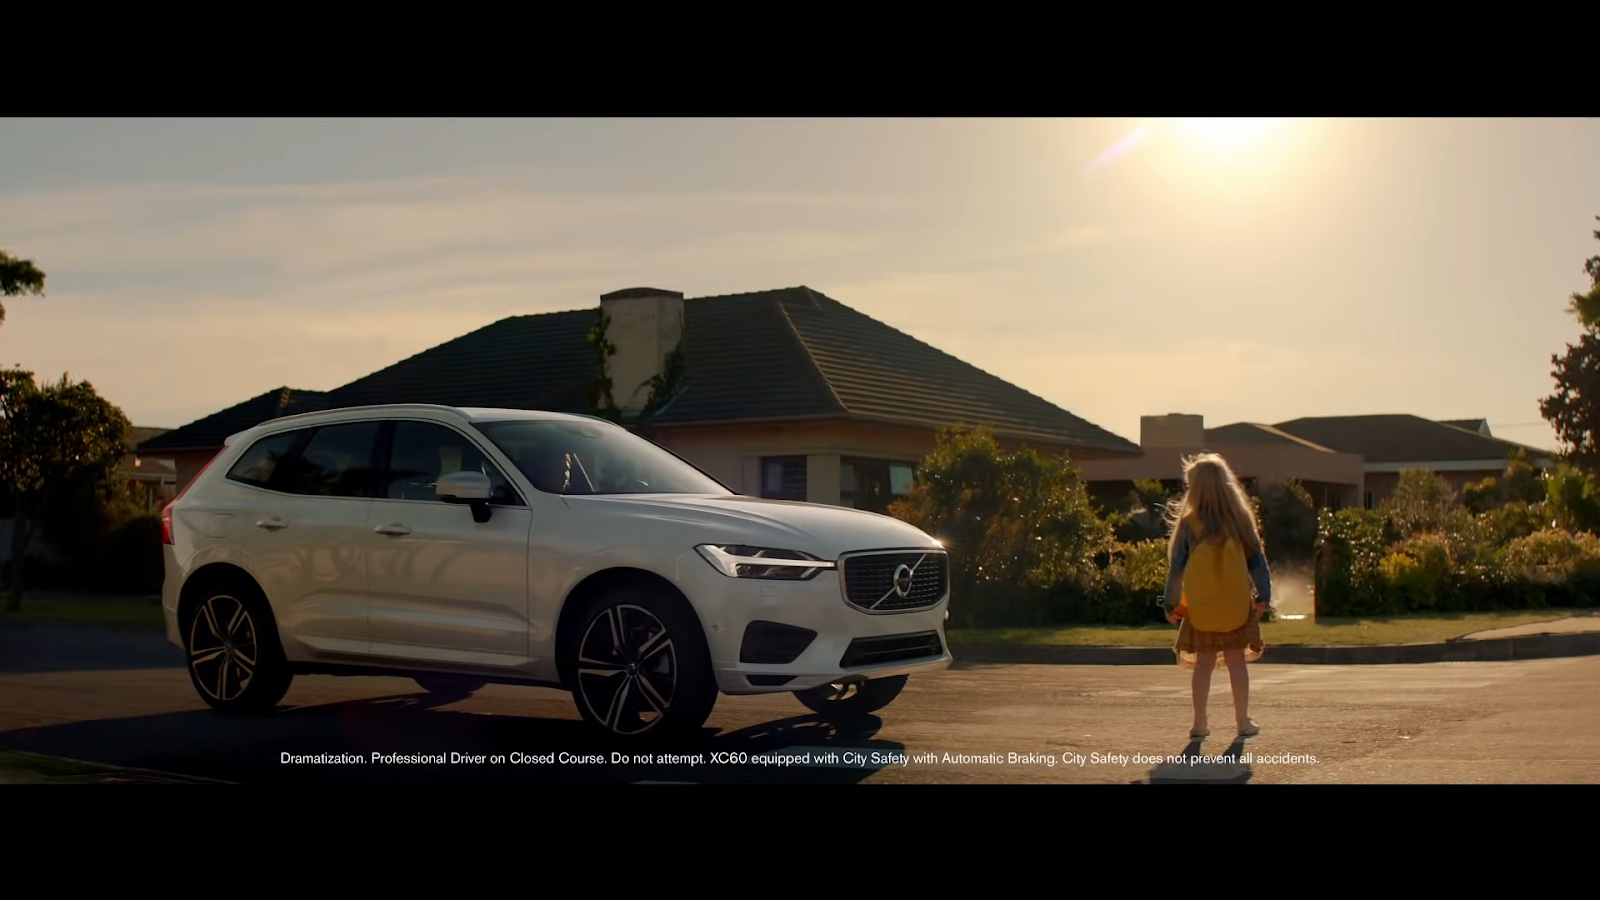 Volvo XC60 stops just before it's about to hit a little girl